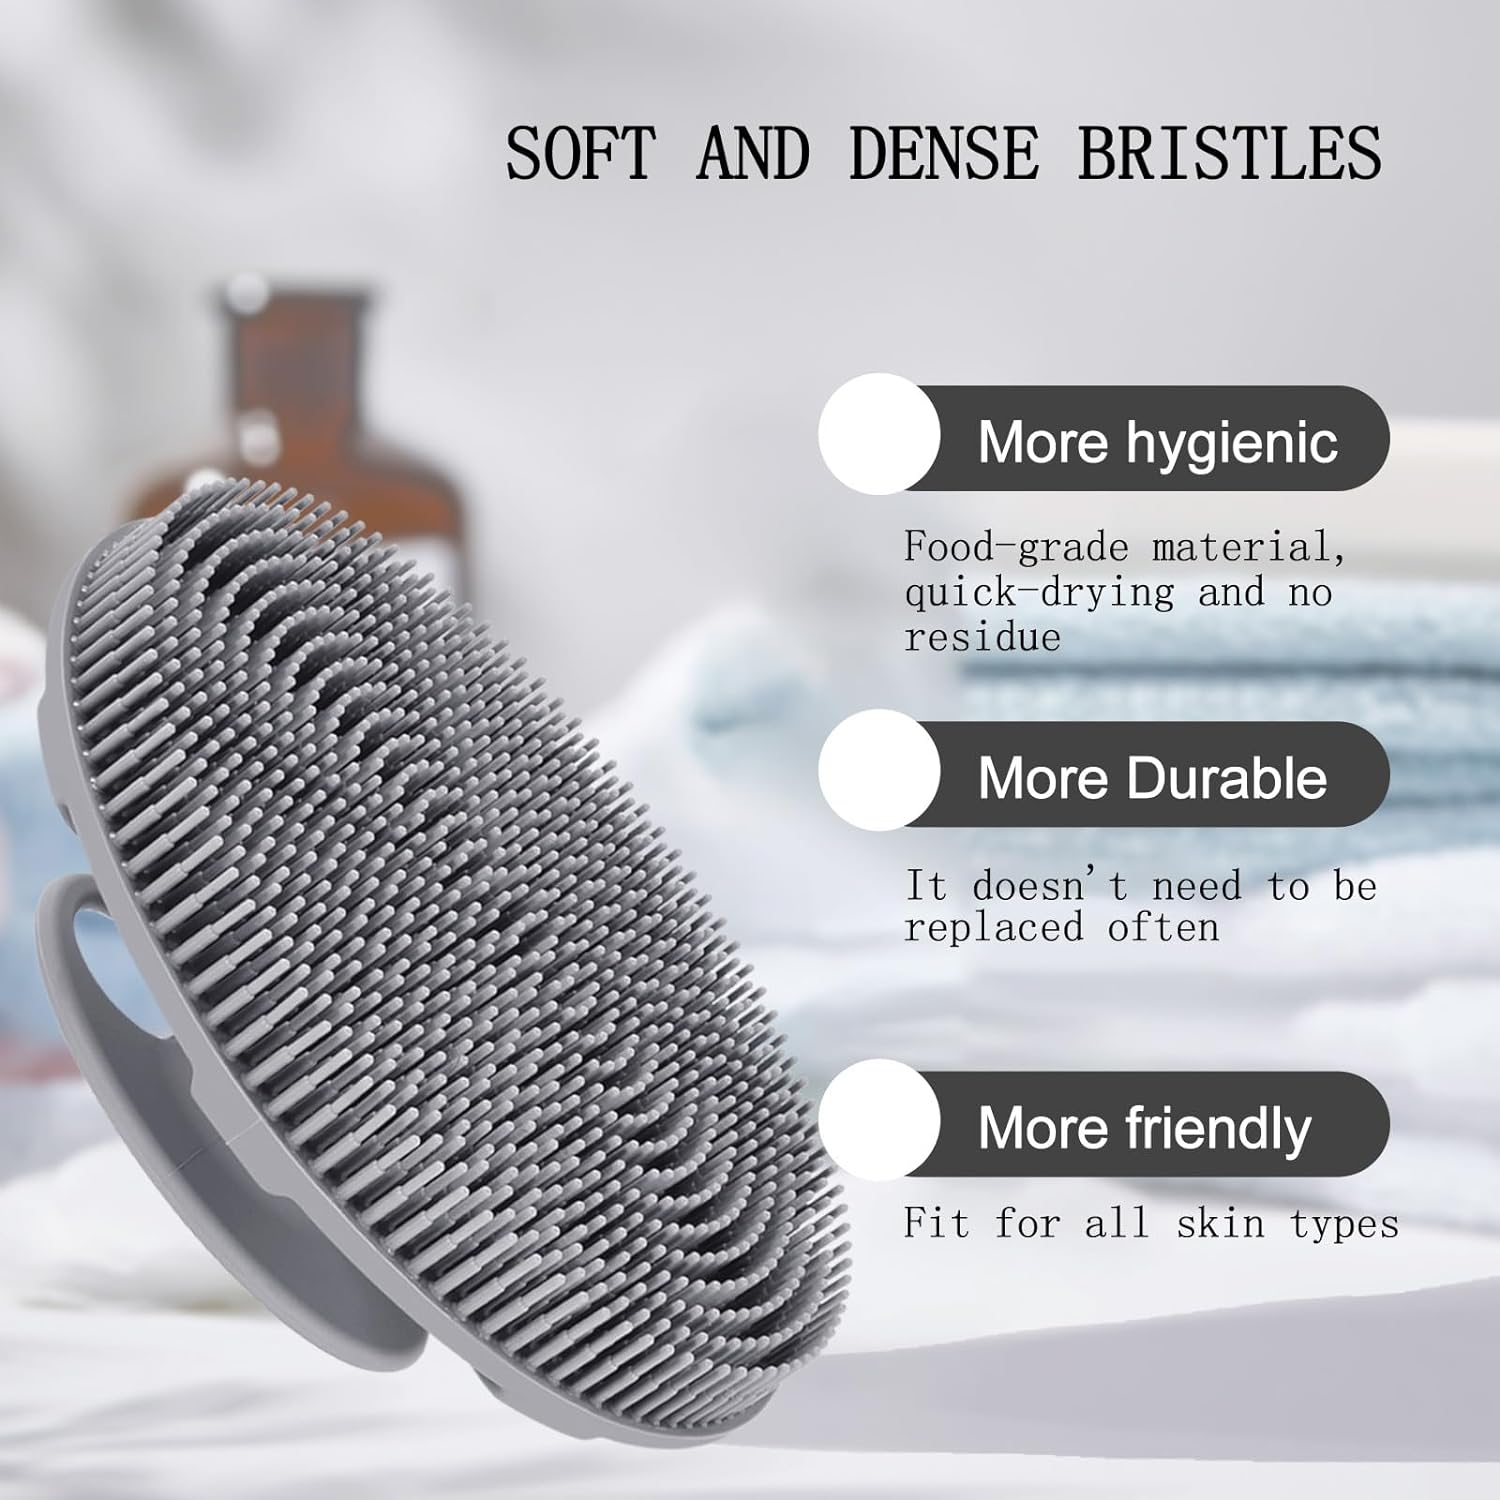 Wholesale prices with free shipping all over United States INNERNEED Food-Grade Soft Silicone Body Scrubber Shower Brush Handheld Cleansing Skin Brush, Gentle Exfoliating and Lather Well (Black) - Steven Deals